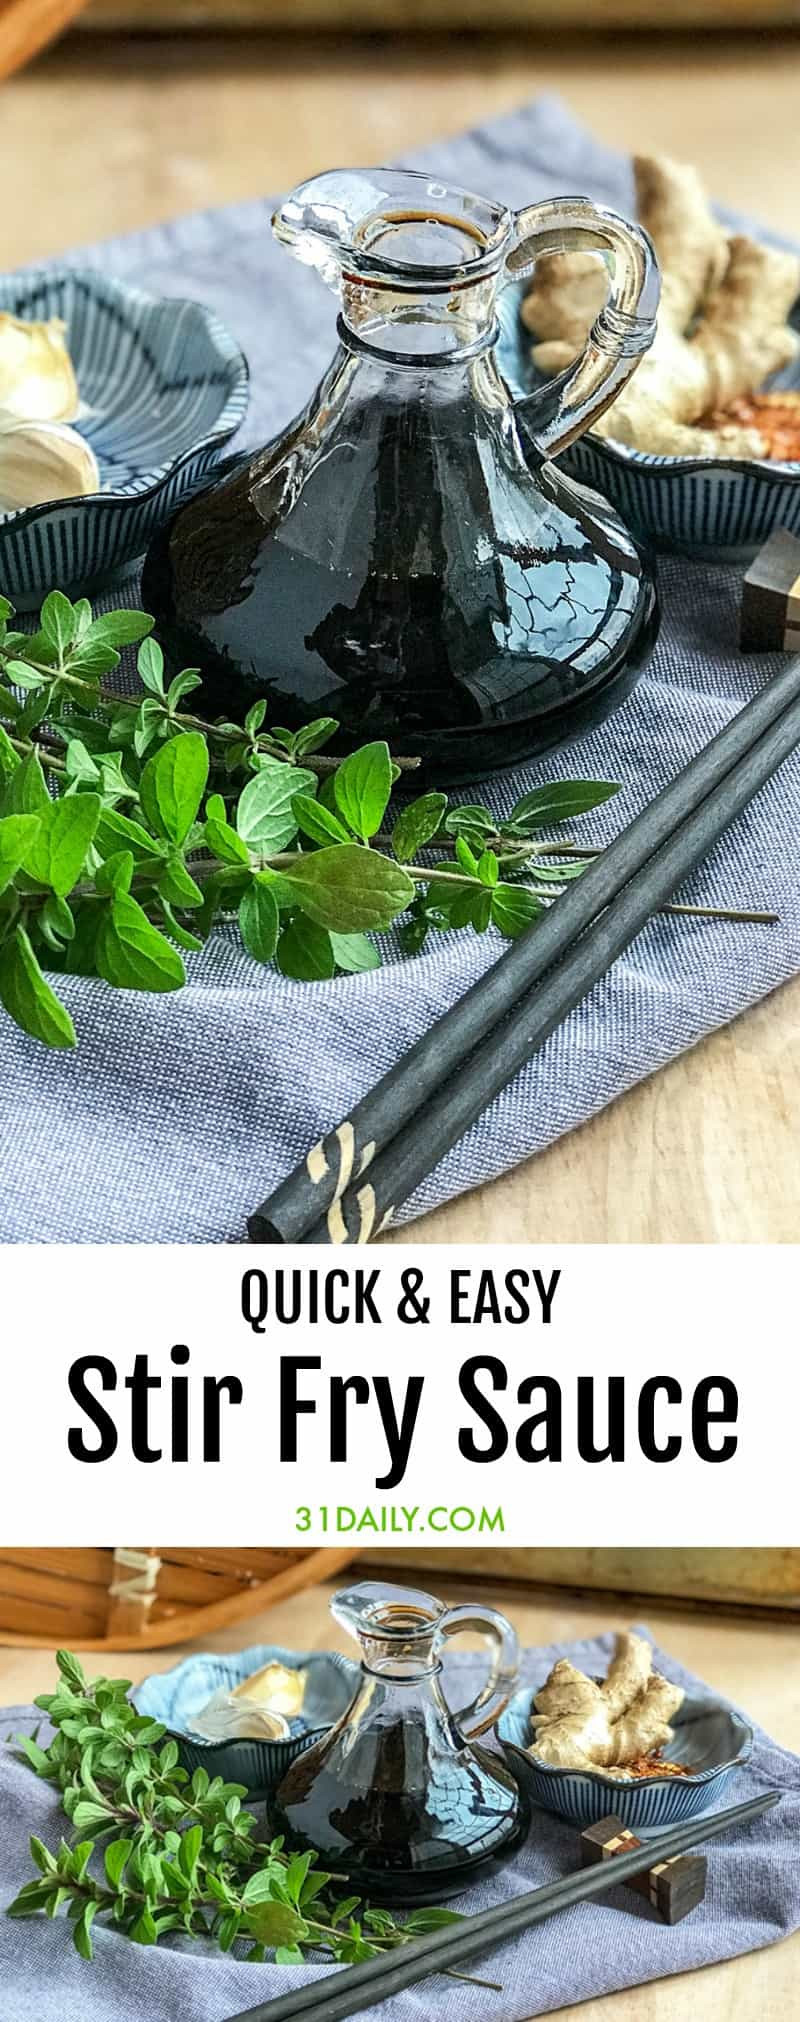 Quick And Easy Stir Fry Sauces
 Quick and Simple Stir Fry Sauce for Easy Meals 31 Daily